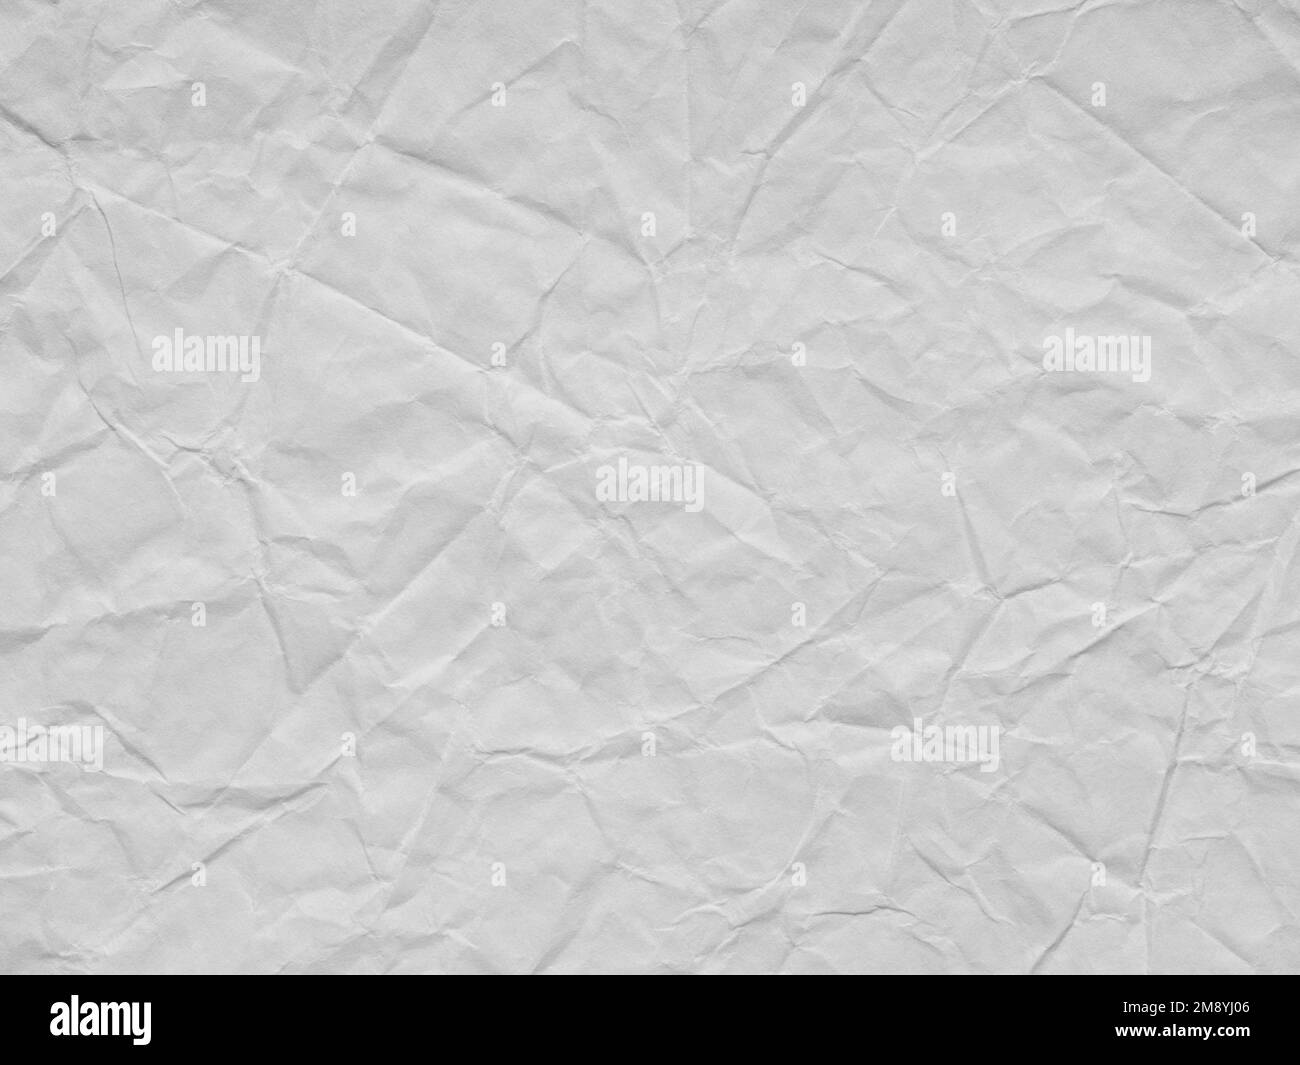 White crumpled paper texture. Background for handcrafts, new year designs decoration, text, lettering, wall screen saver. Page or sheet for interior Stock Photo